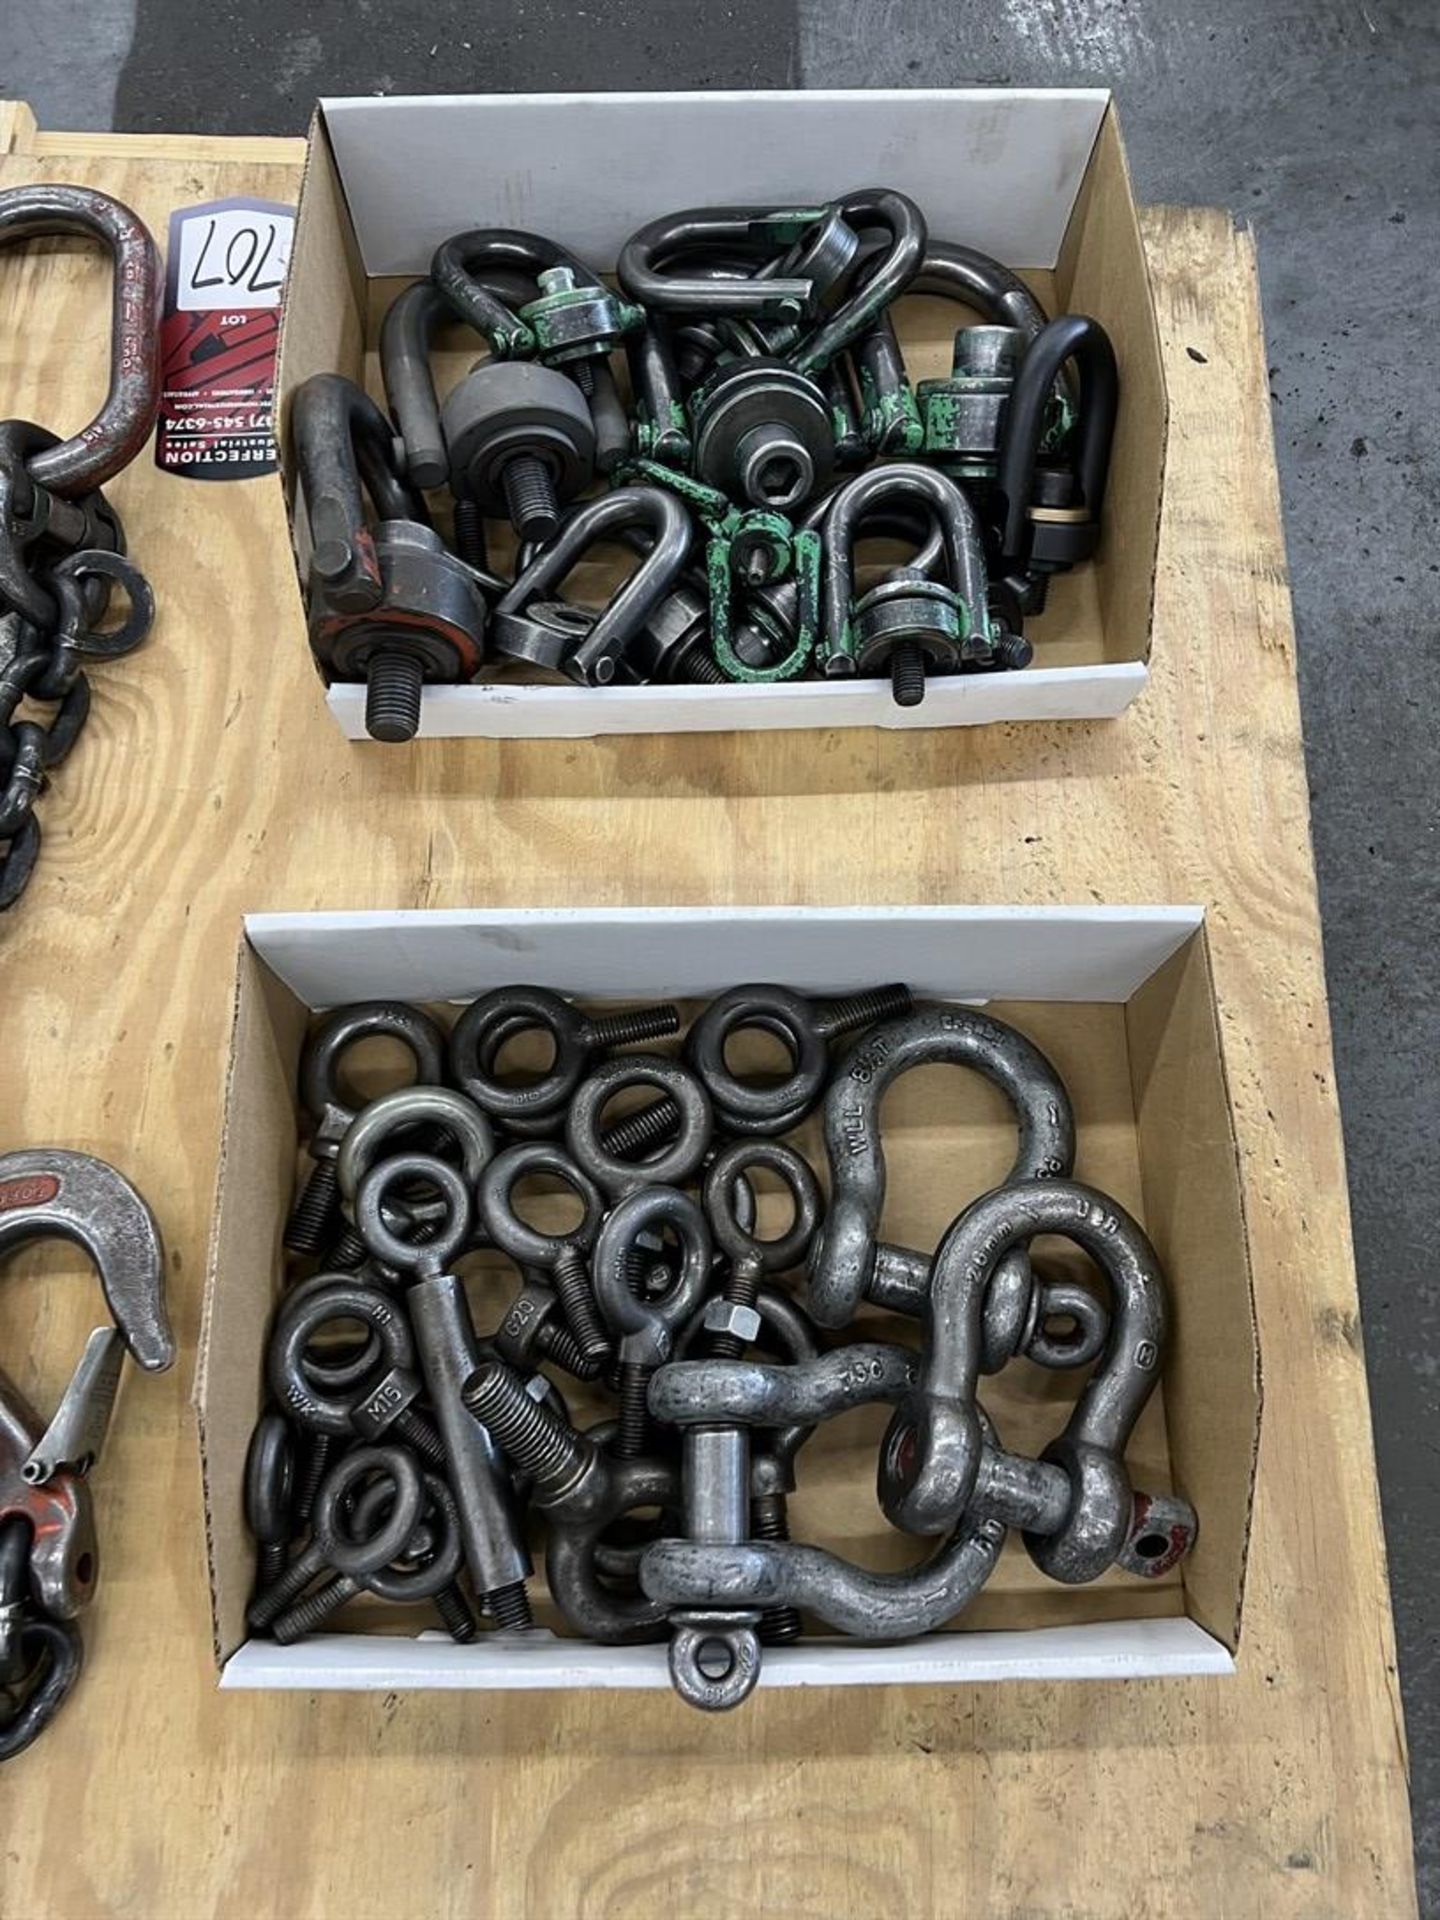 Pallet of Hoist Rings, Eye-Bolts, Nylon Slings and Lifting Chain - Image 2 of 3